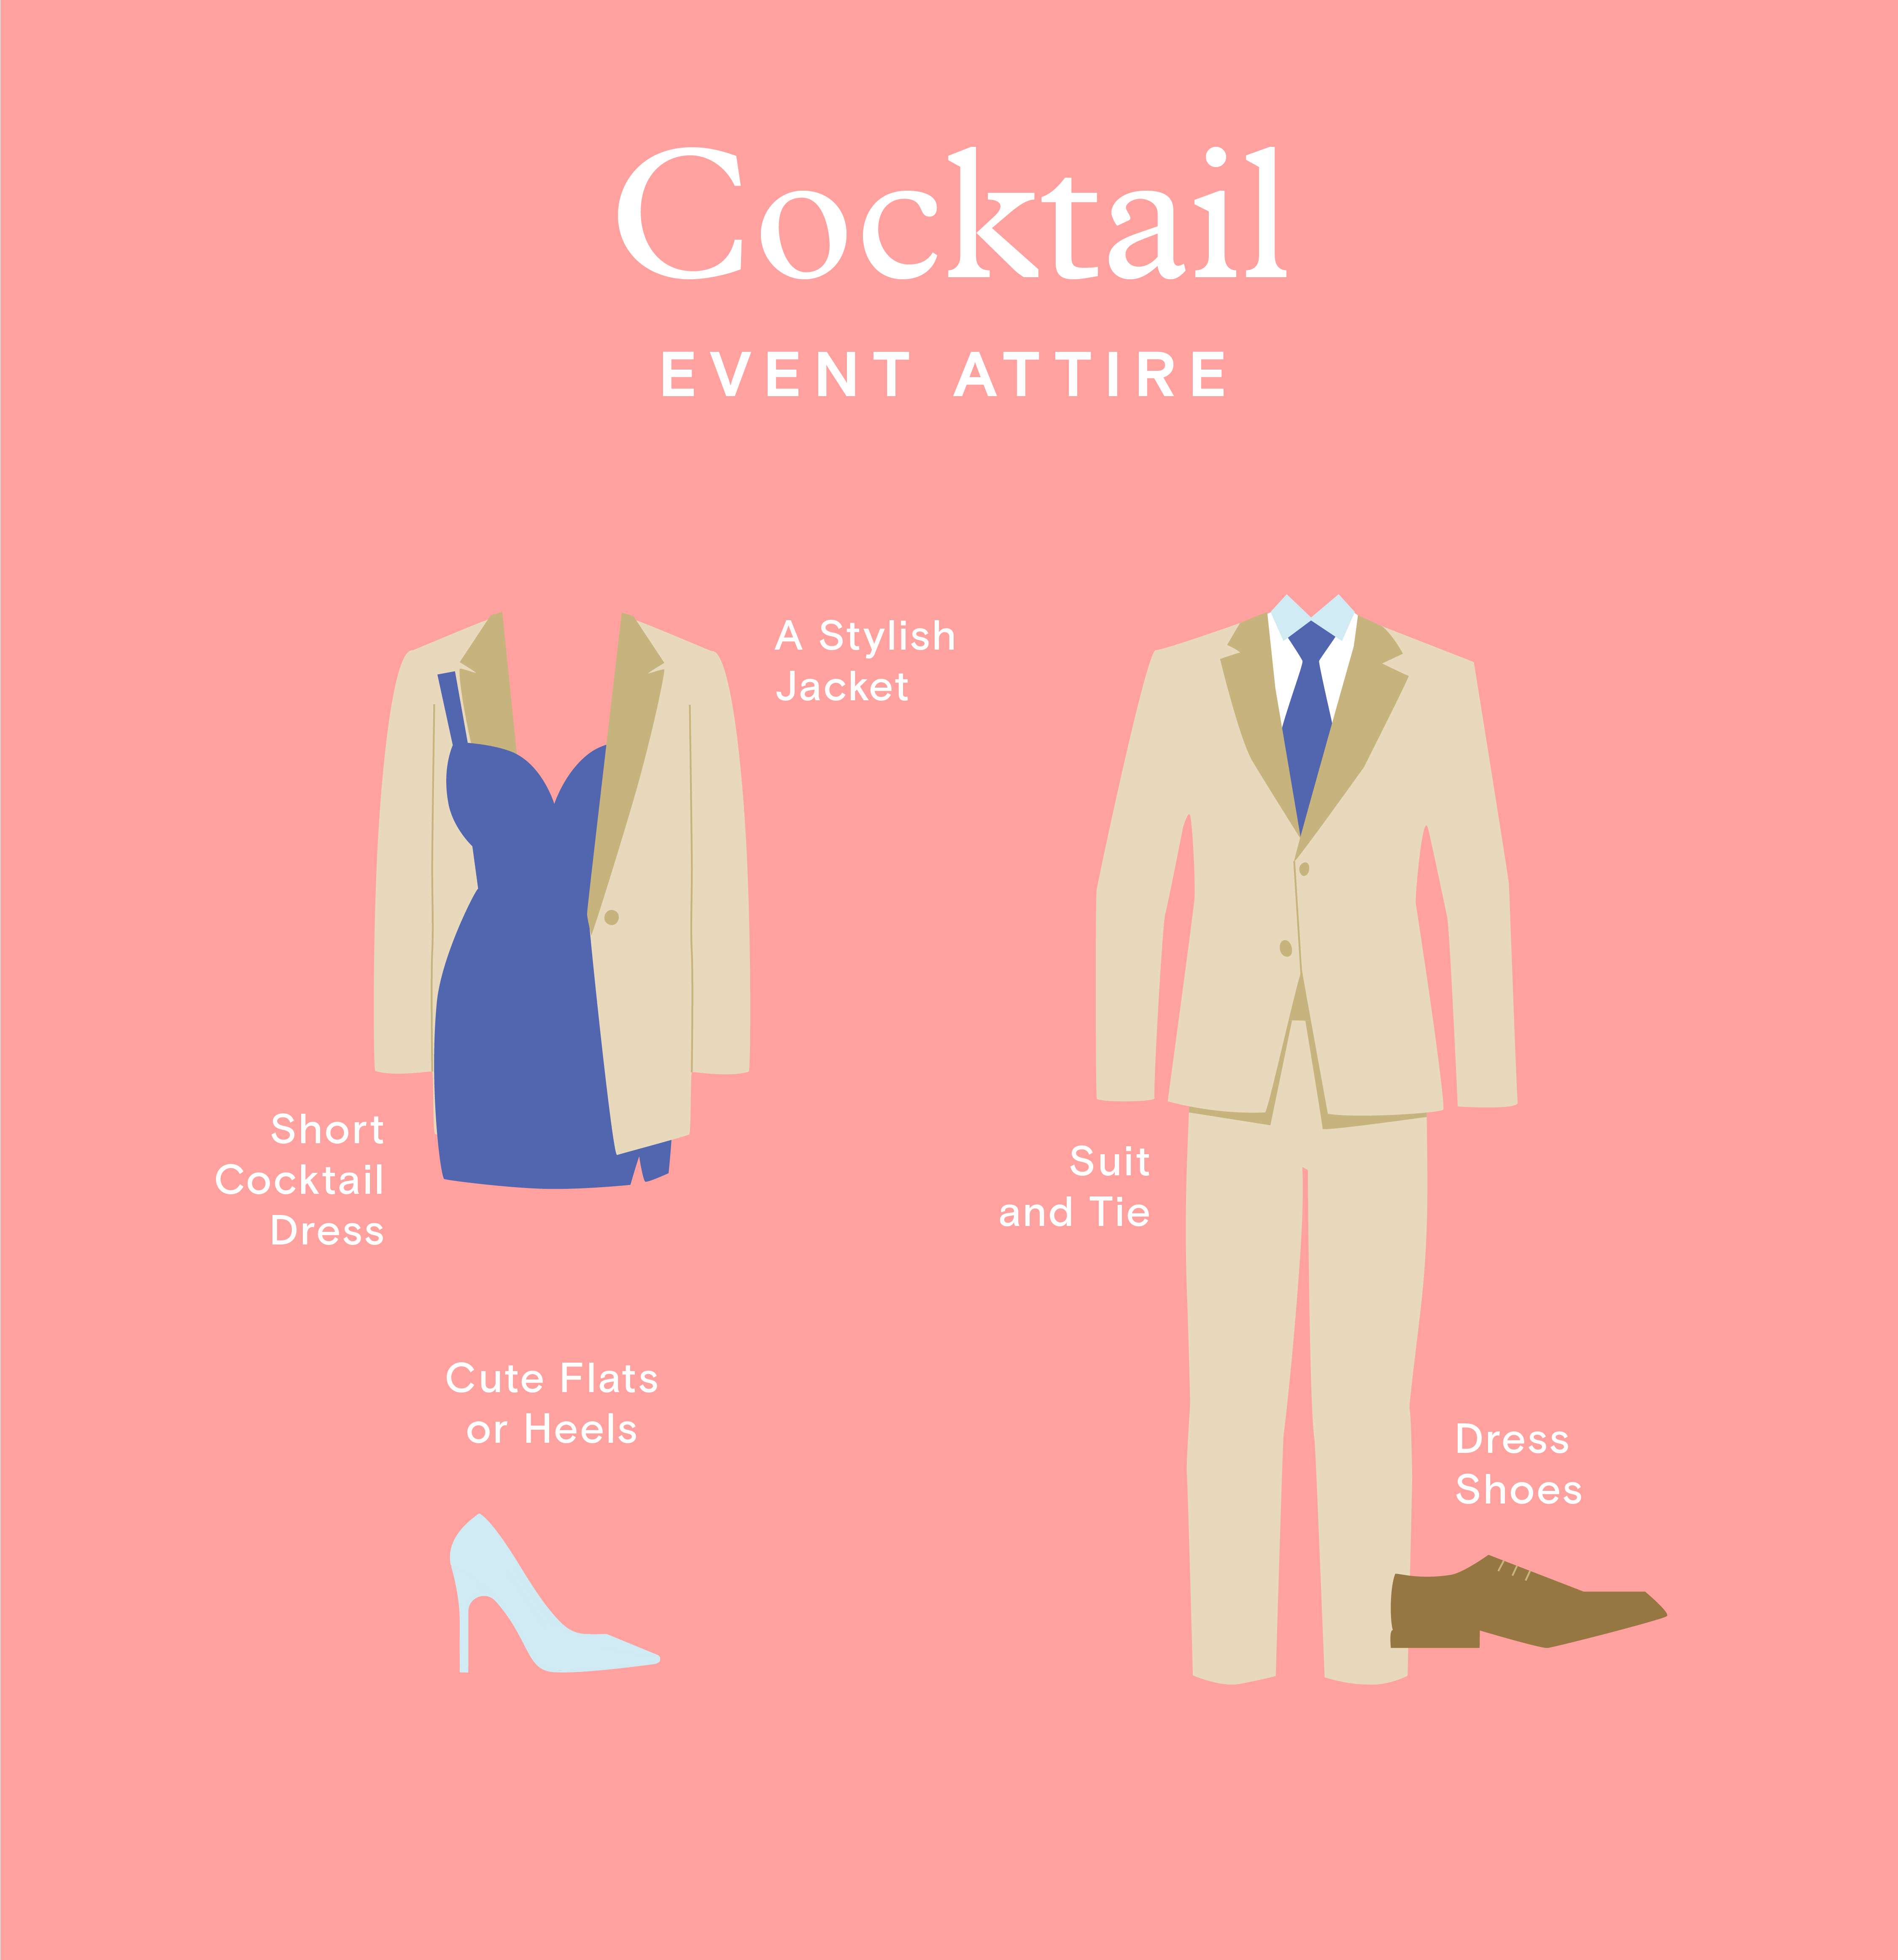 An illustration of cocktail attire for women and for men featuring items from the list like a short cocktail dress and a suit and tie.